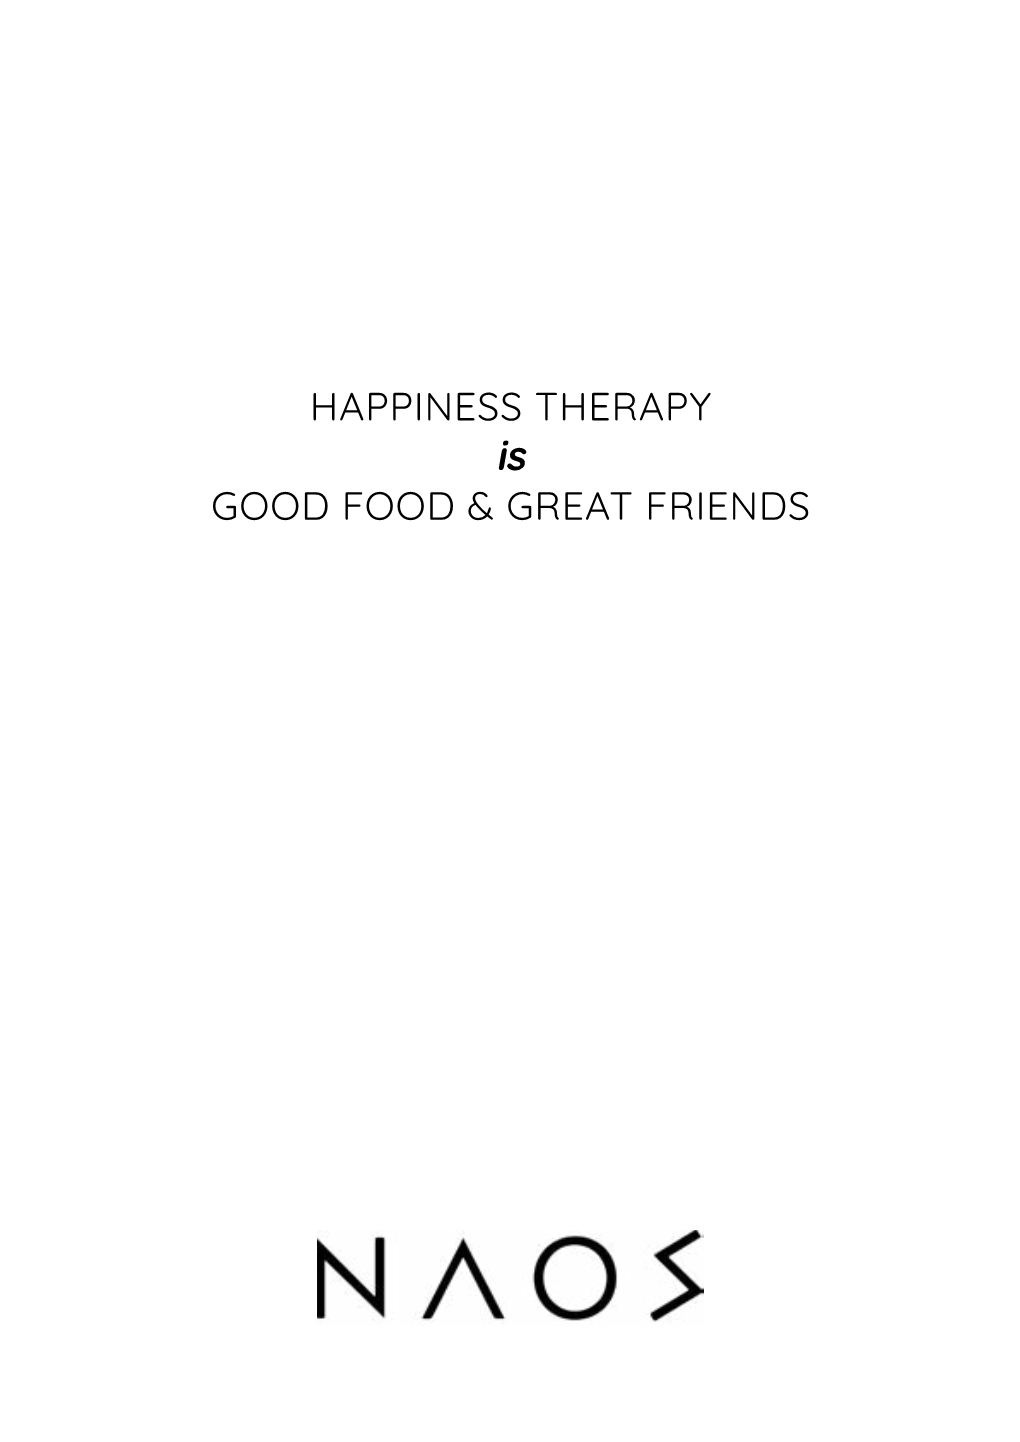 Happiness Therapy Good Food & Great Friends